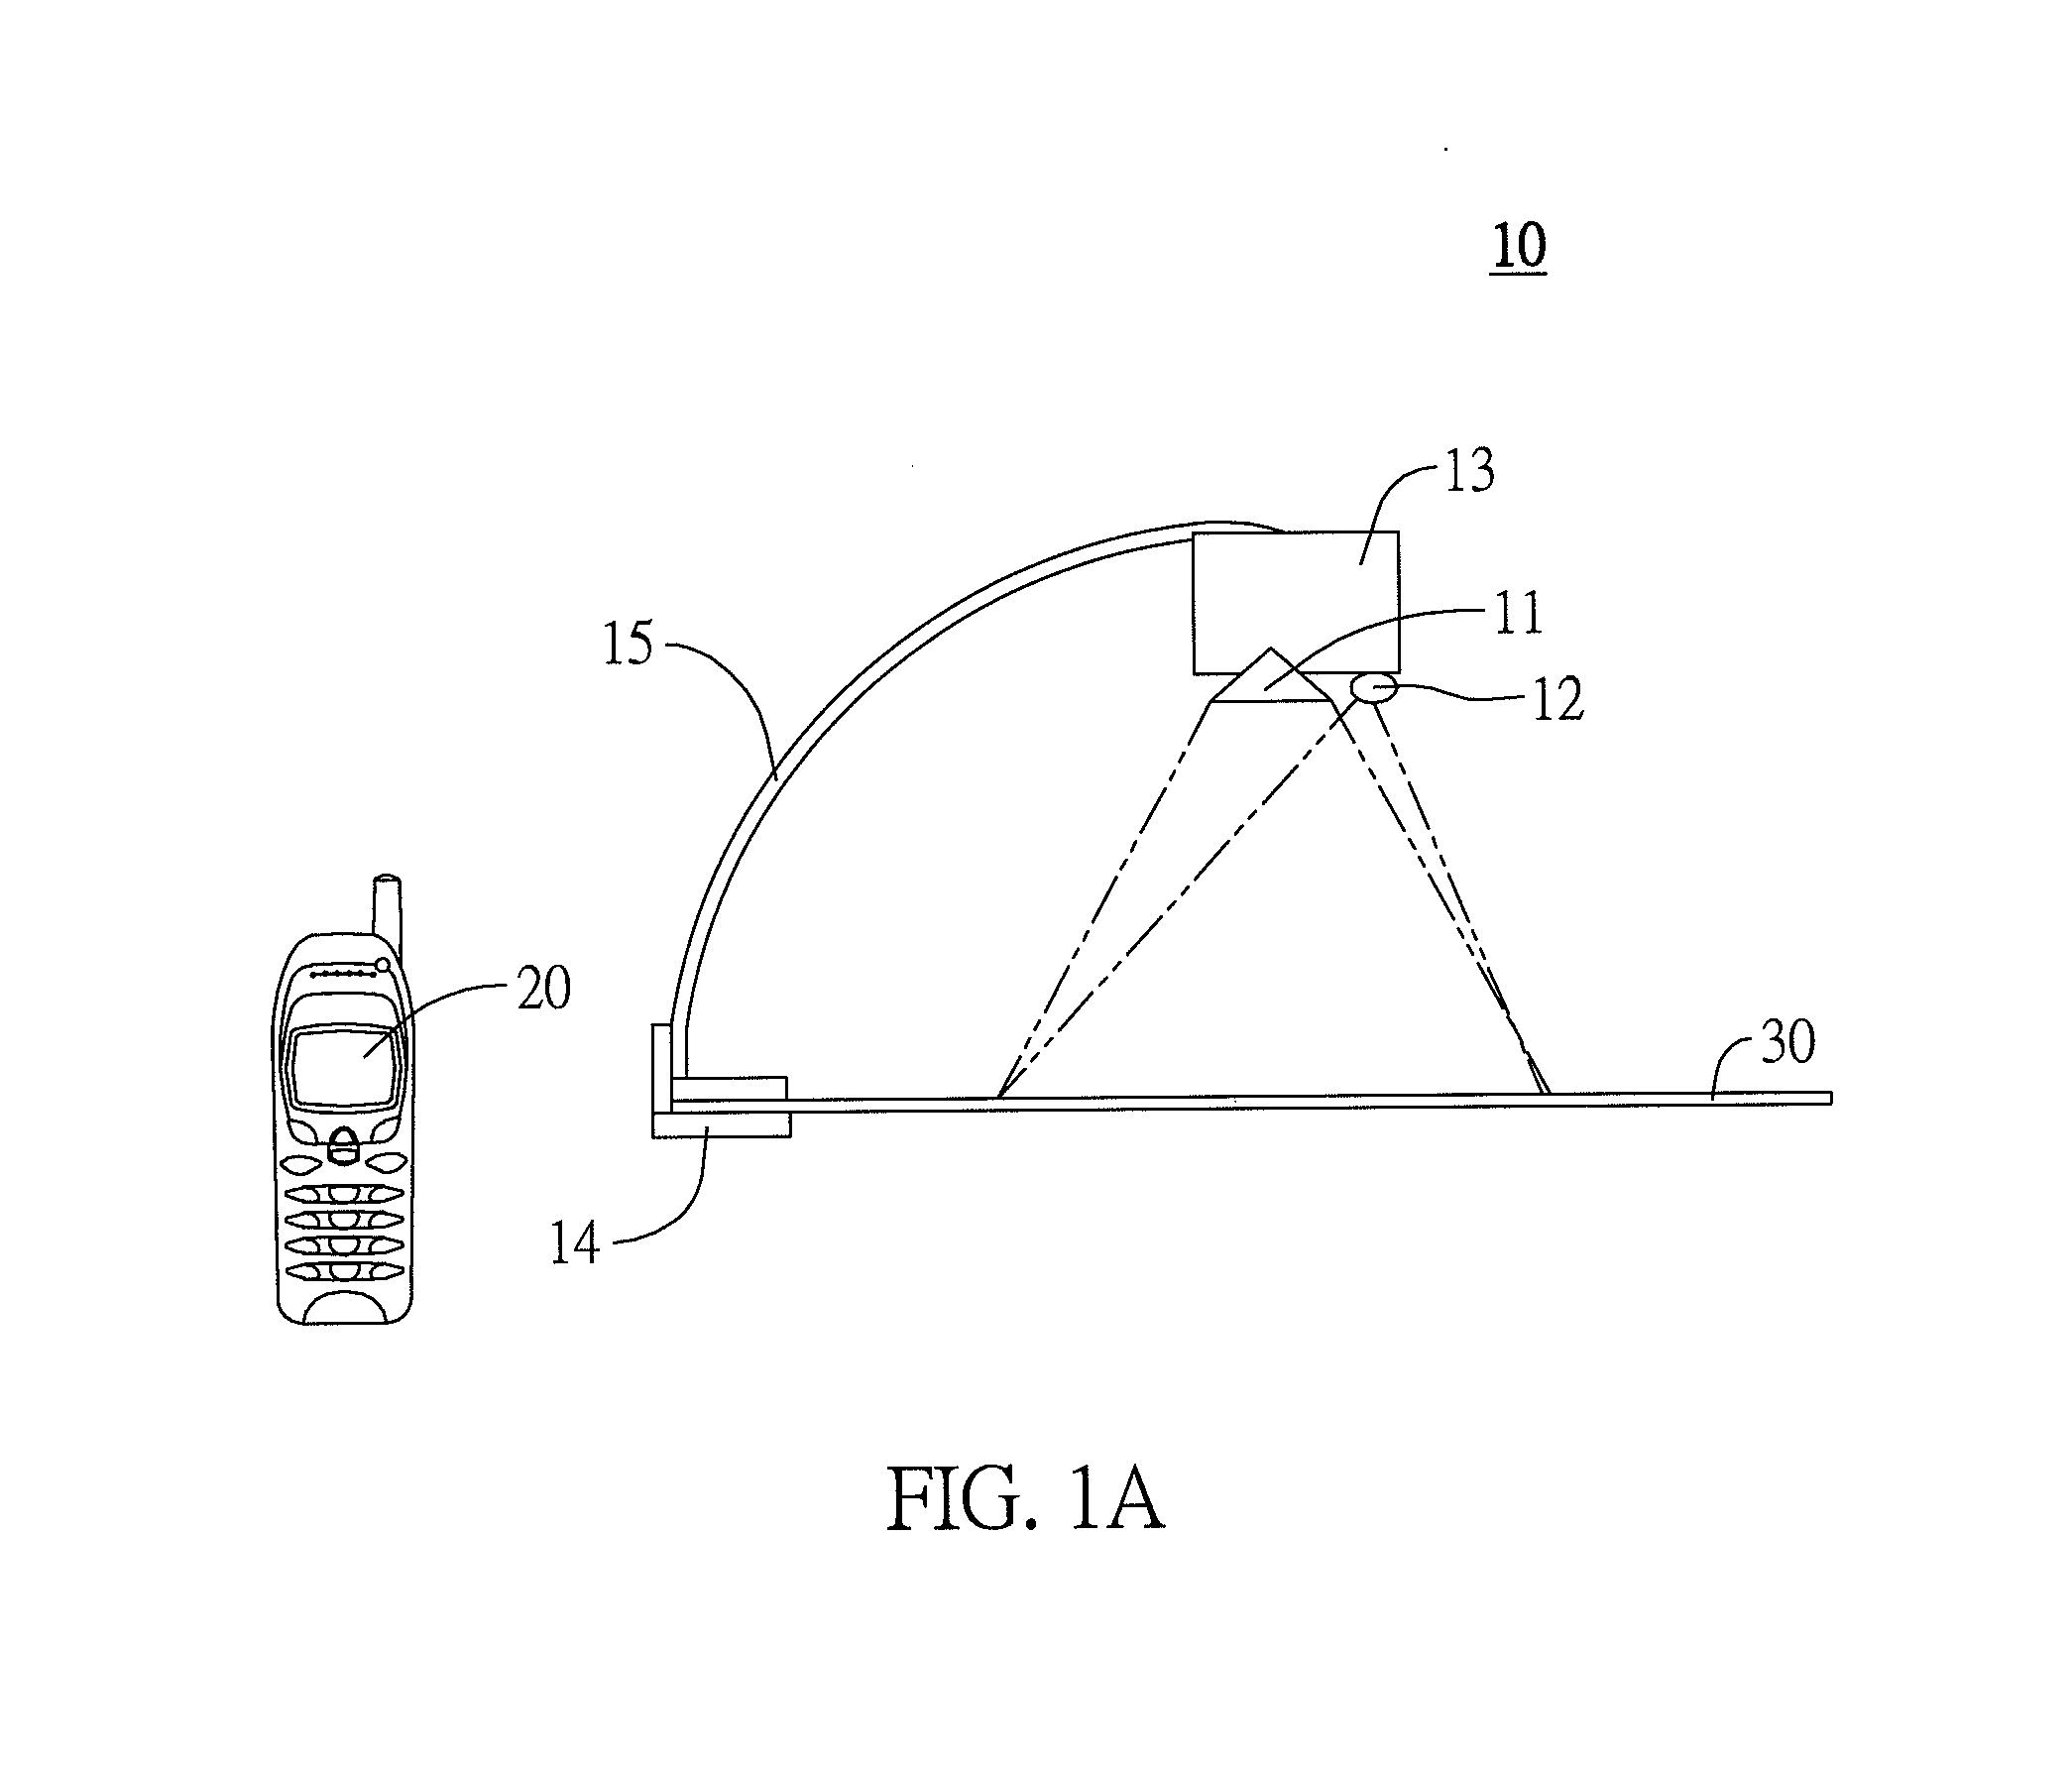 Electronic reading device